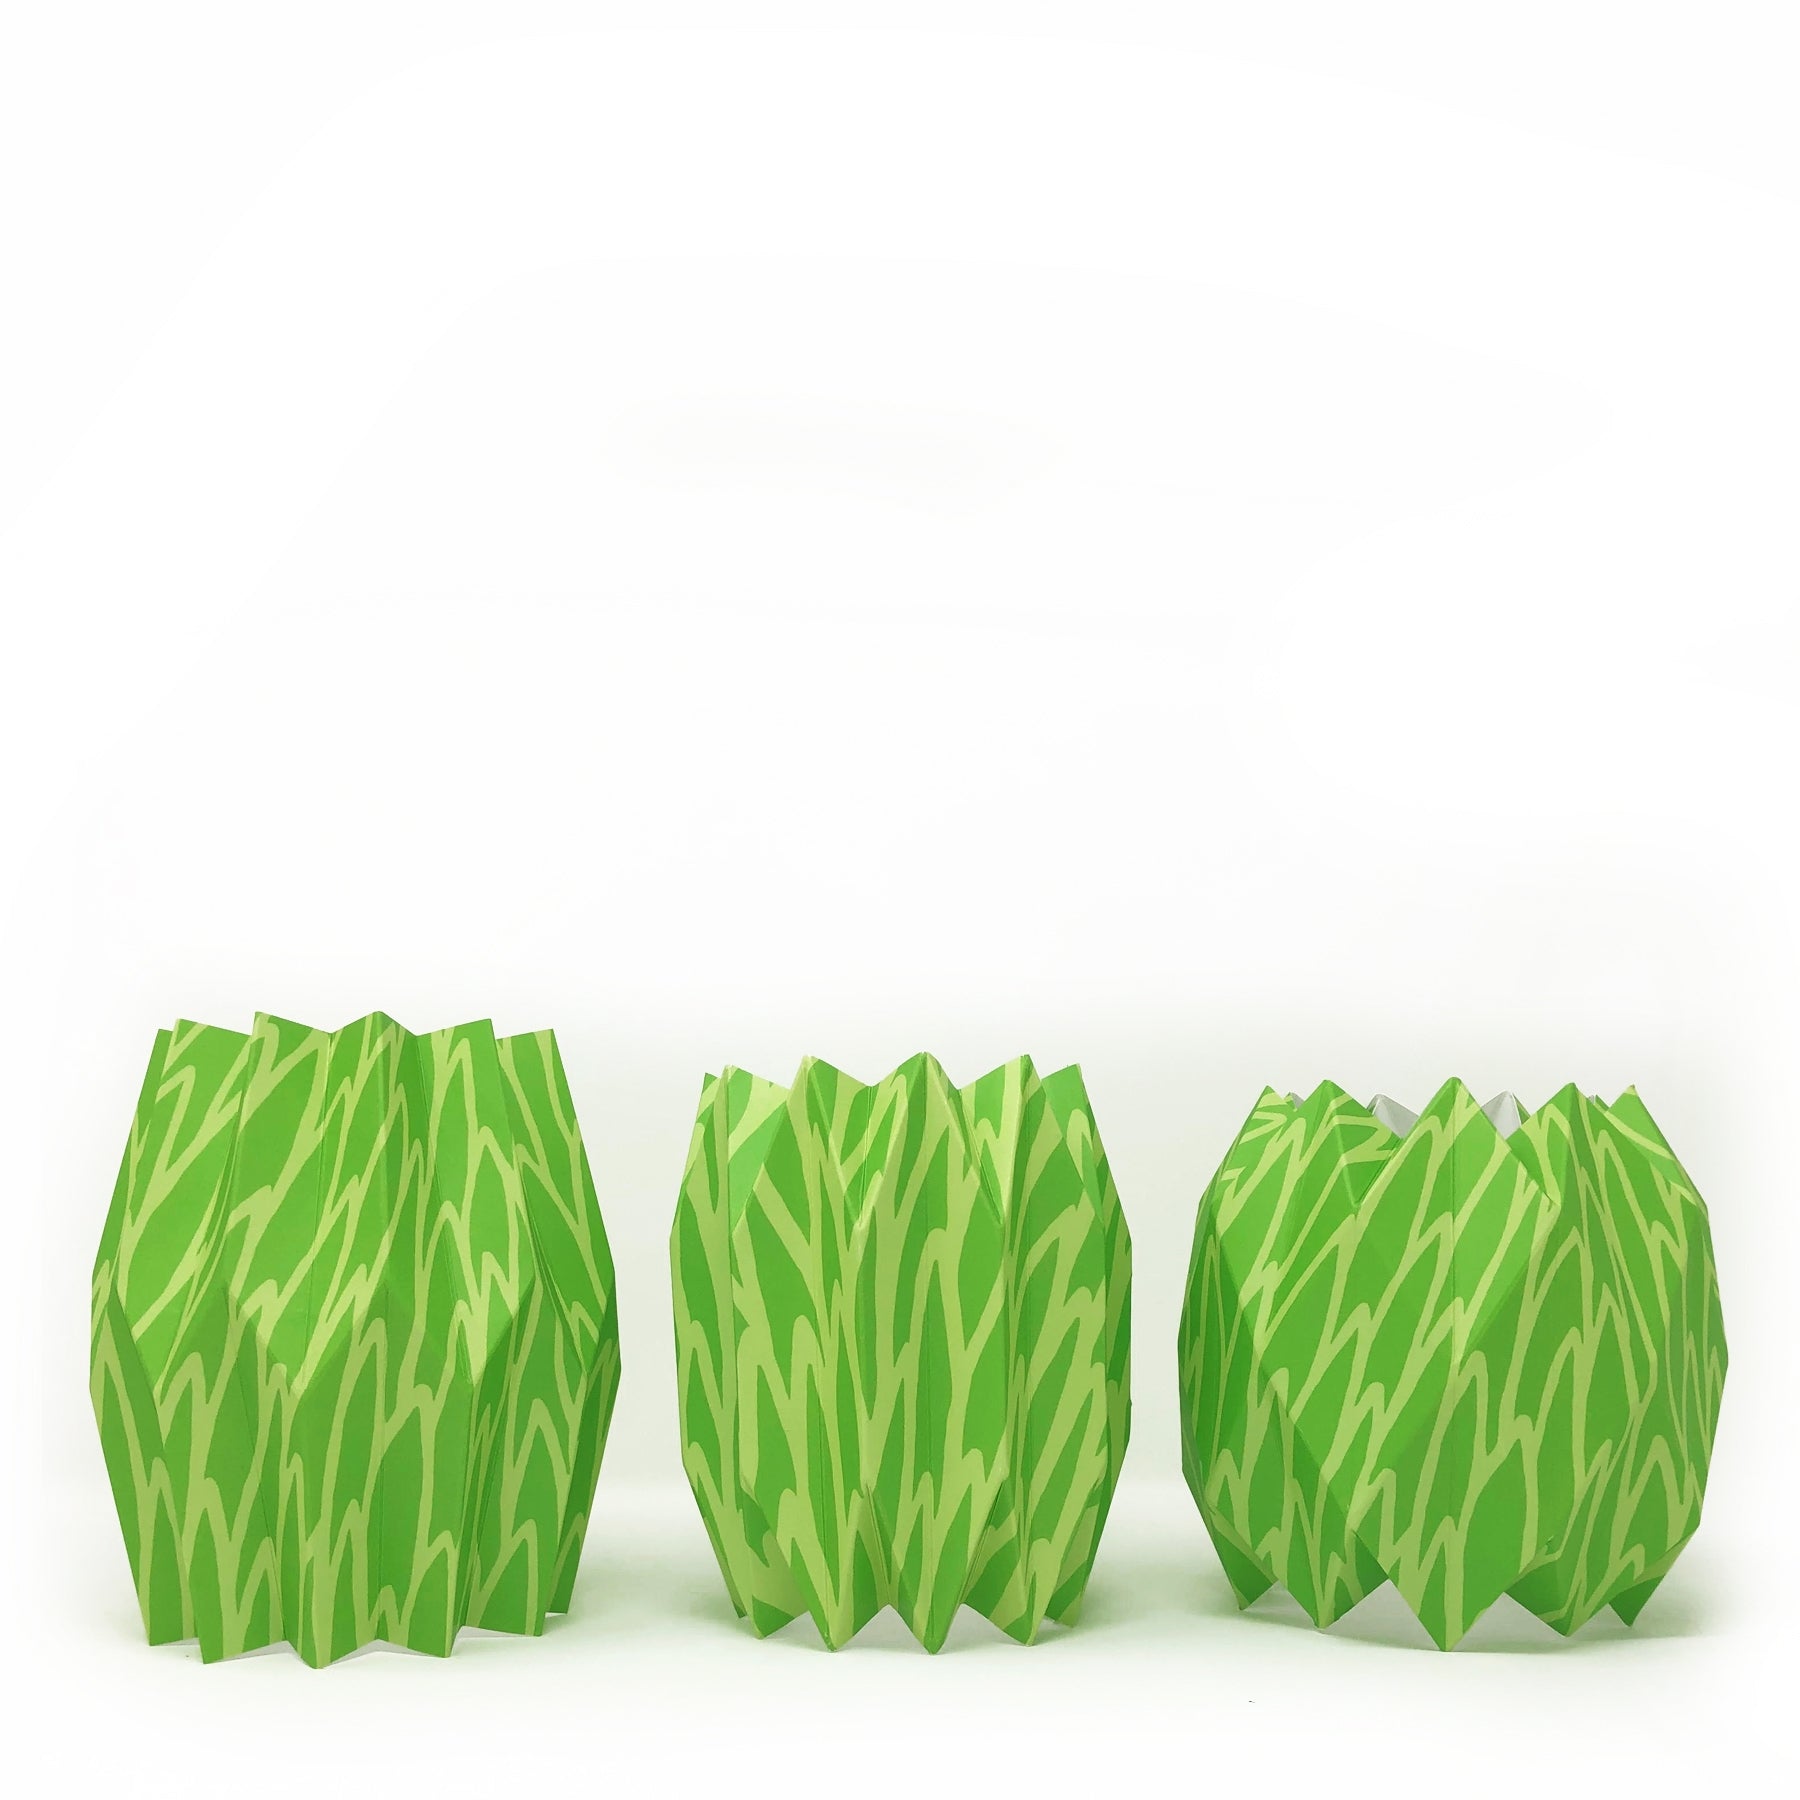 Green Paper Vase Home Decor Lucy Grimes   